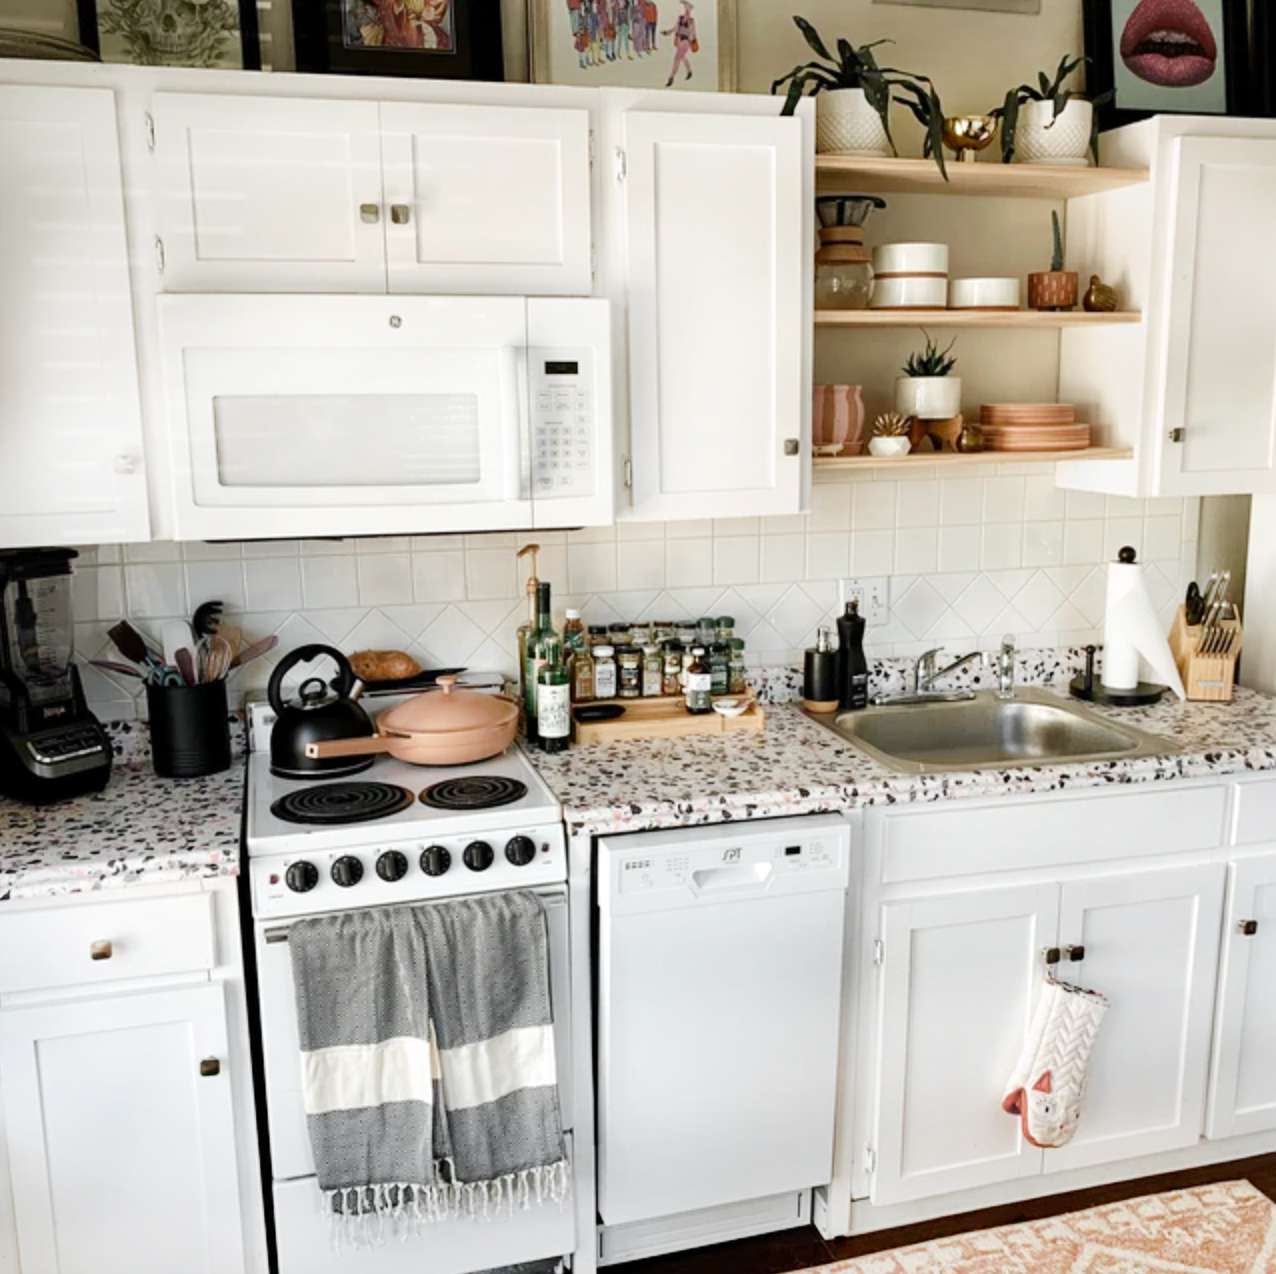 Countertops with terrazzo patterned adhesive paper